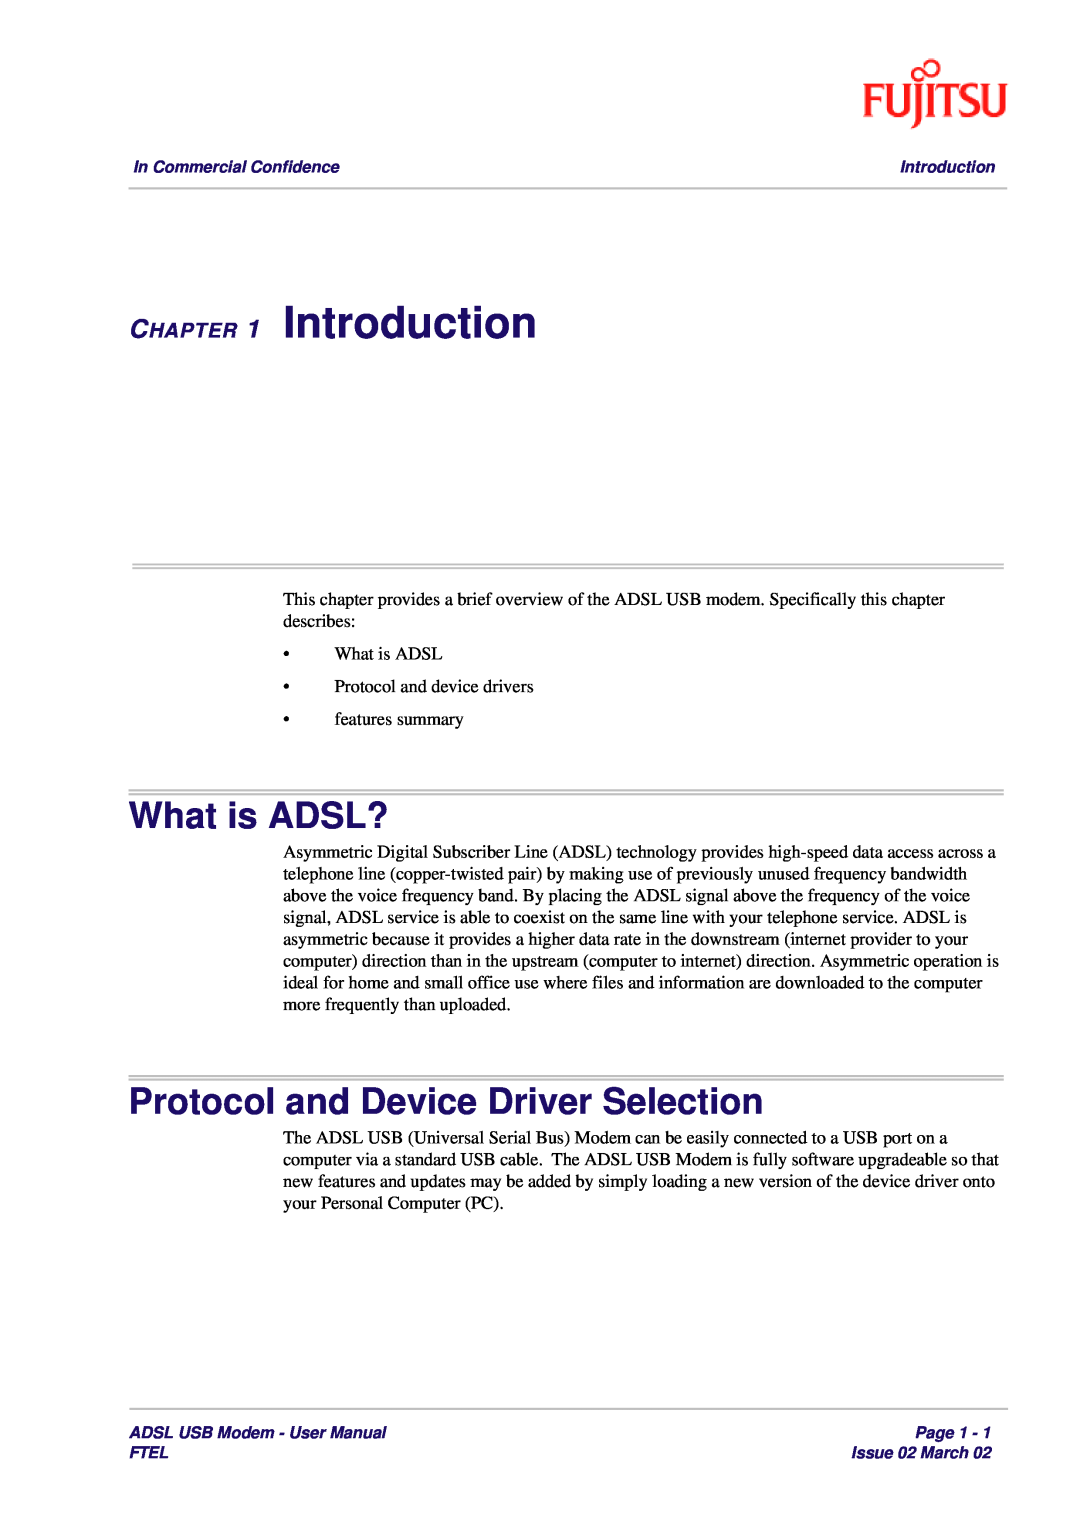 Fujitsu 3XAX-00803AAS user manual Introduction, What is ADSL?, Protocol and Device Driver Selection 